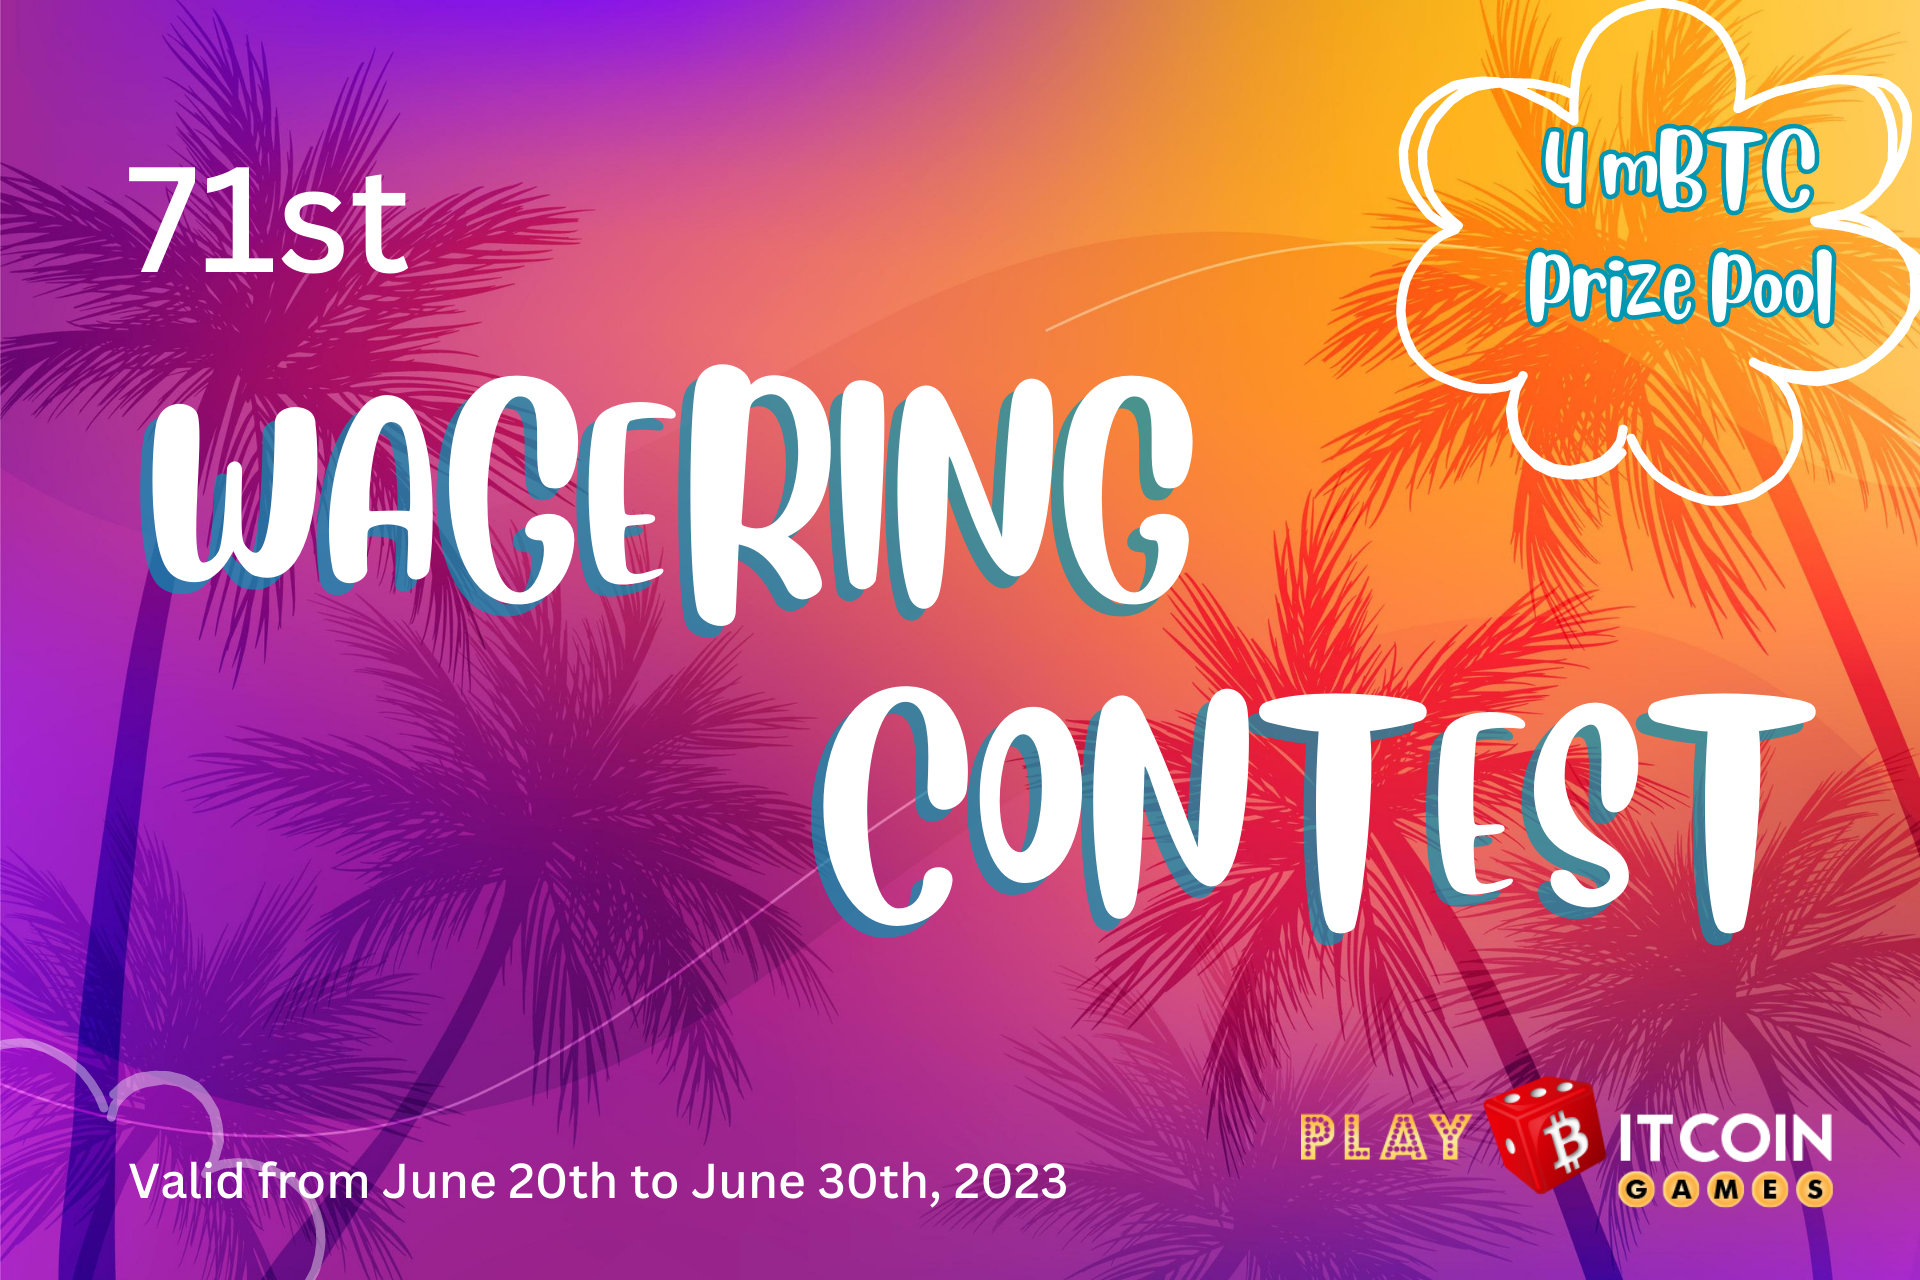 71st wagering contest - playbitcoingames.com